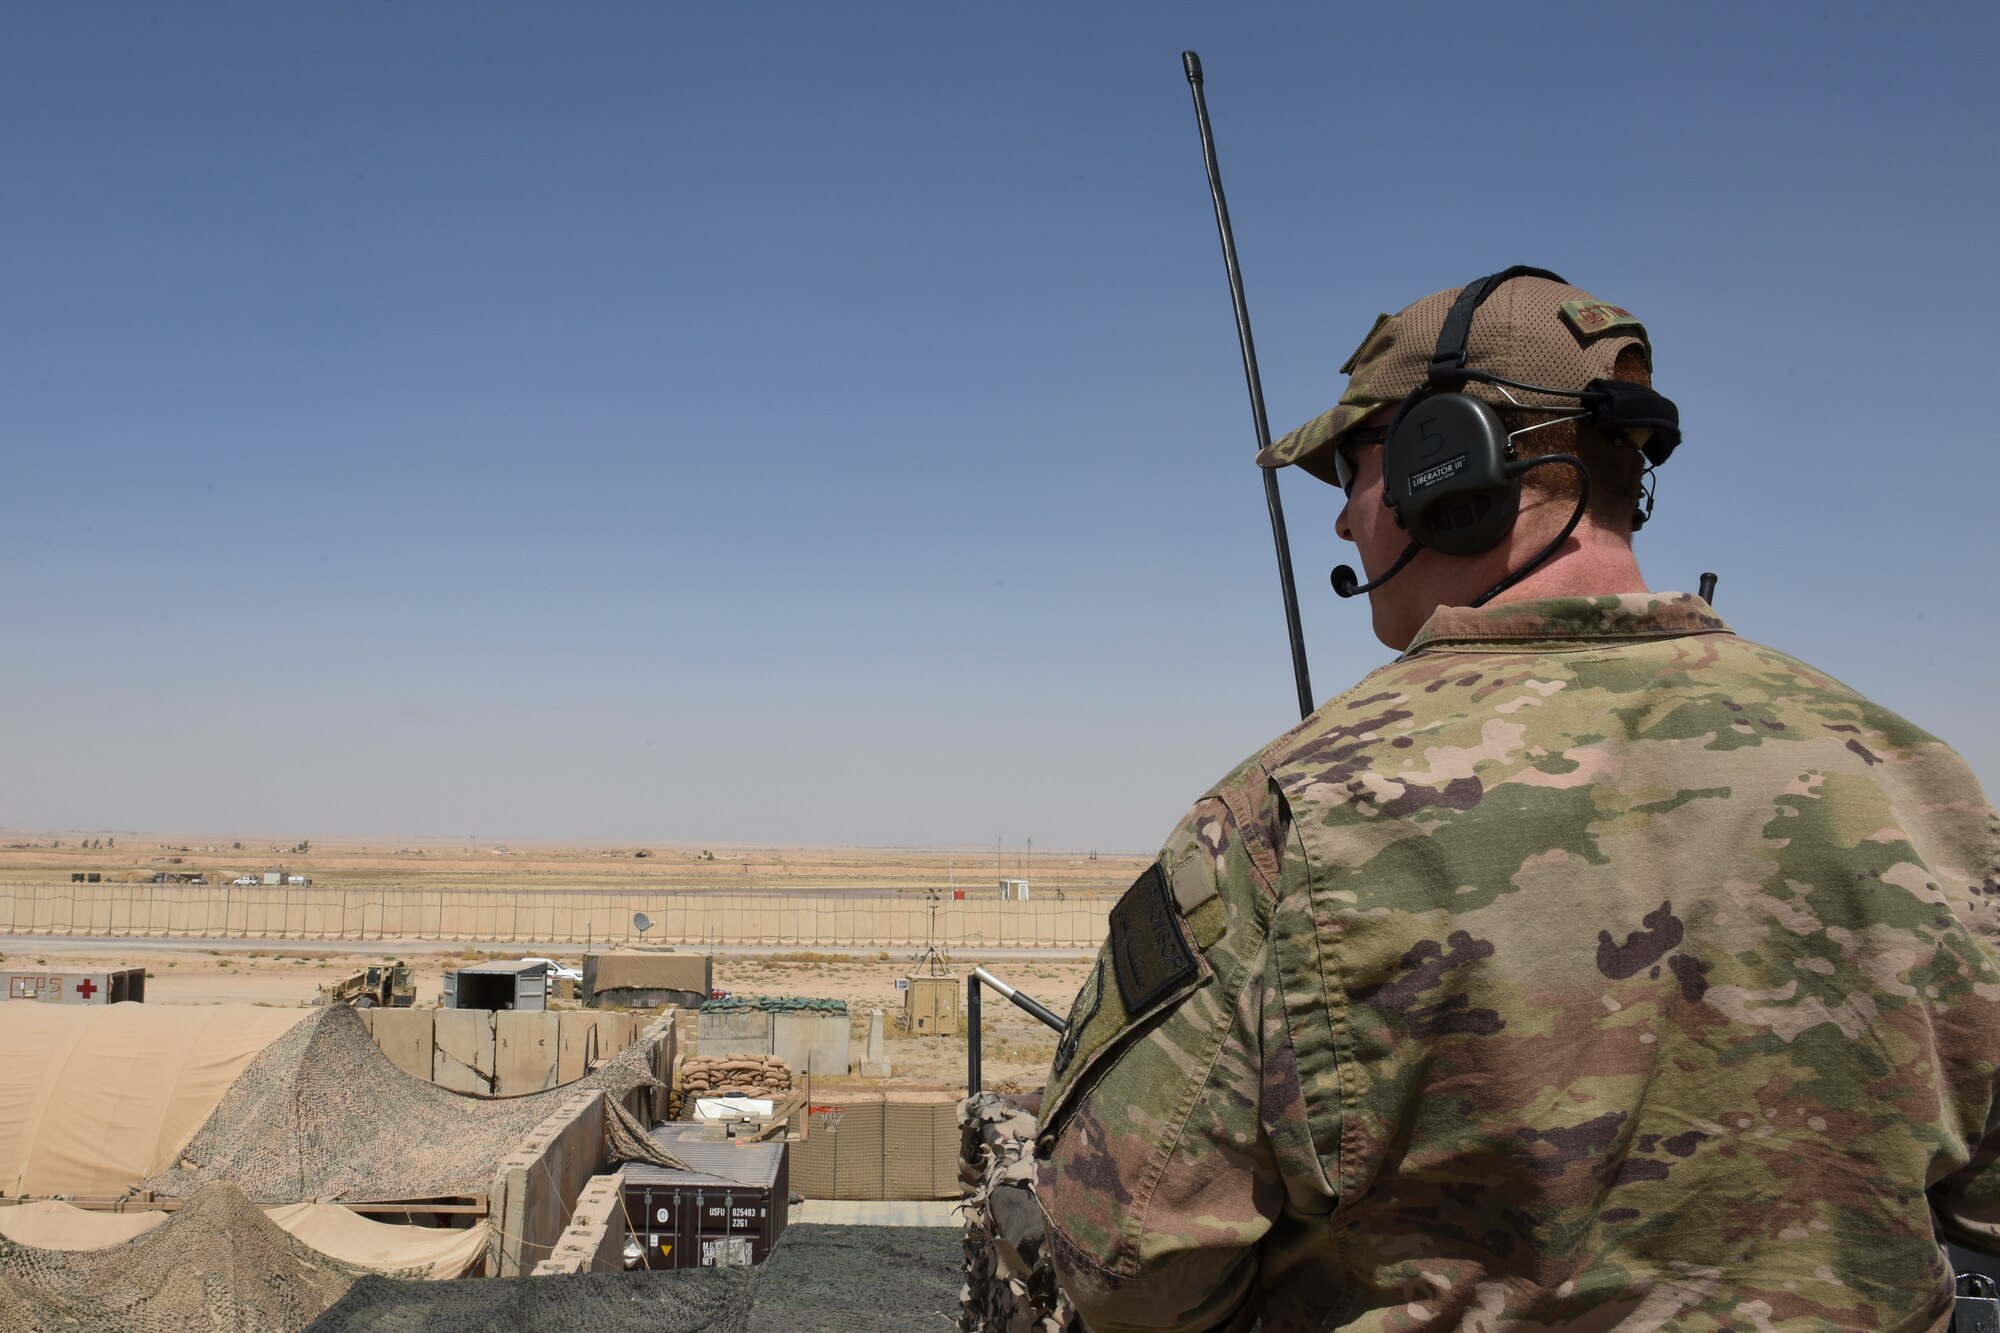 Senior Airman Brennan Gettinger, a 447th Air Expeditionary Group air traffic controller, directs air traffic from a tower July 17, 2018, at Qayyarah Airfield West, Iraq. Q-West is a forward operating base that supports strategic airlift for Operation Inherent Resolve. (U.S. Air Force photo by Tech. Sgt. Caleb Pierce)